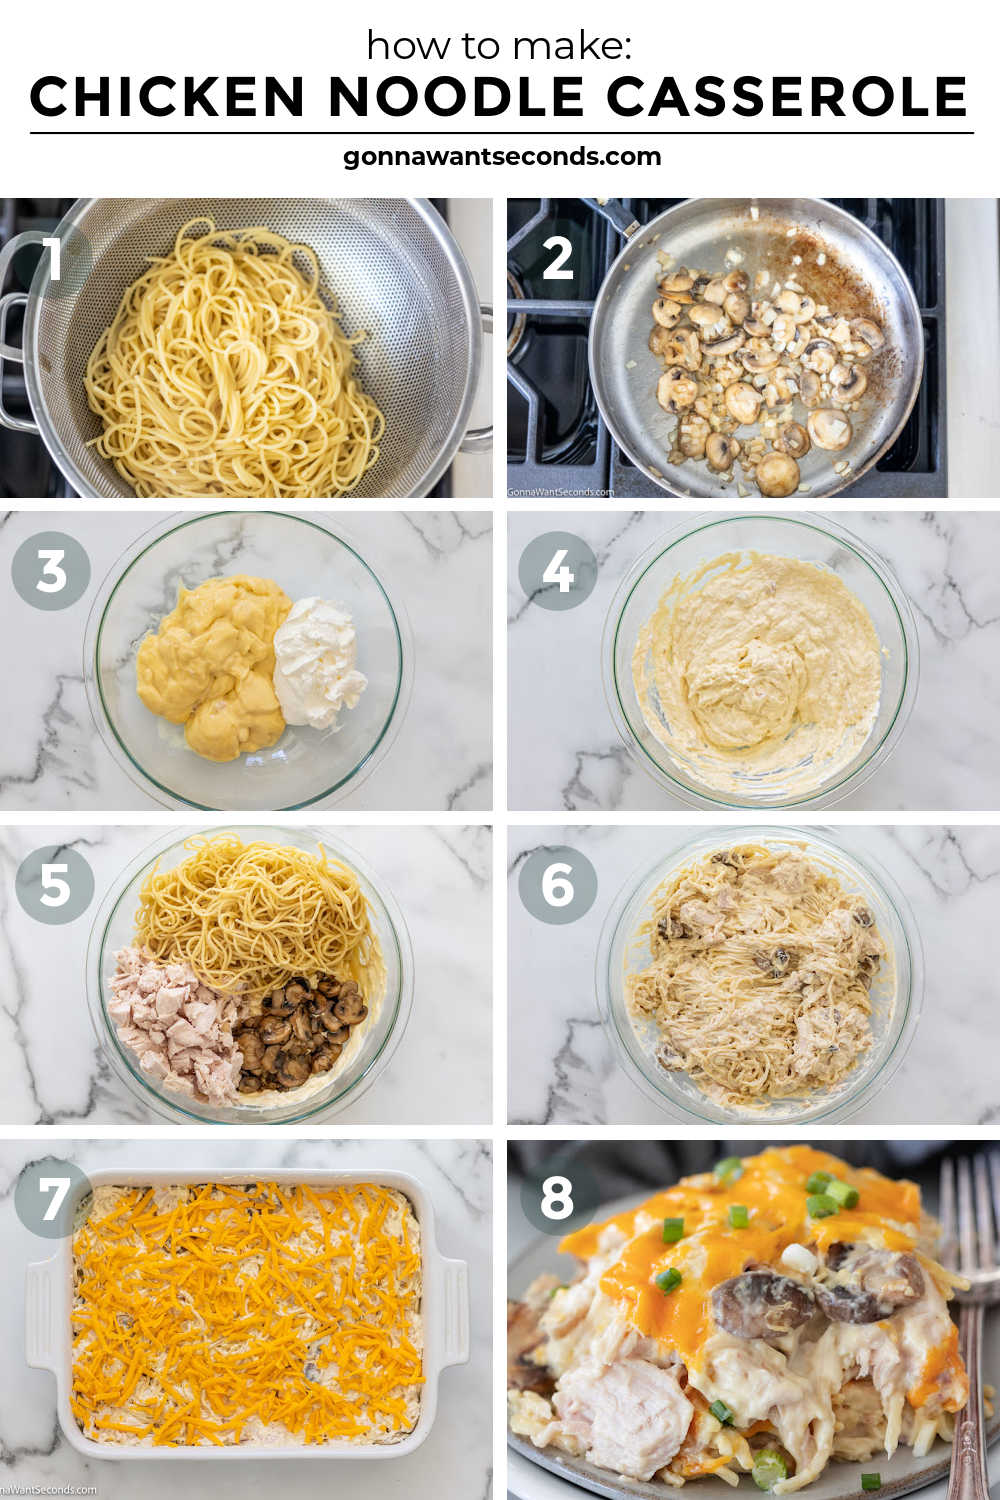 Step by step how to make chicken noodle casserole